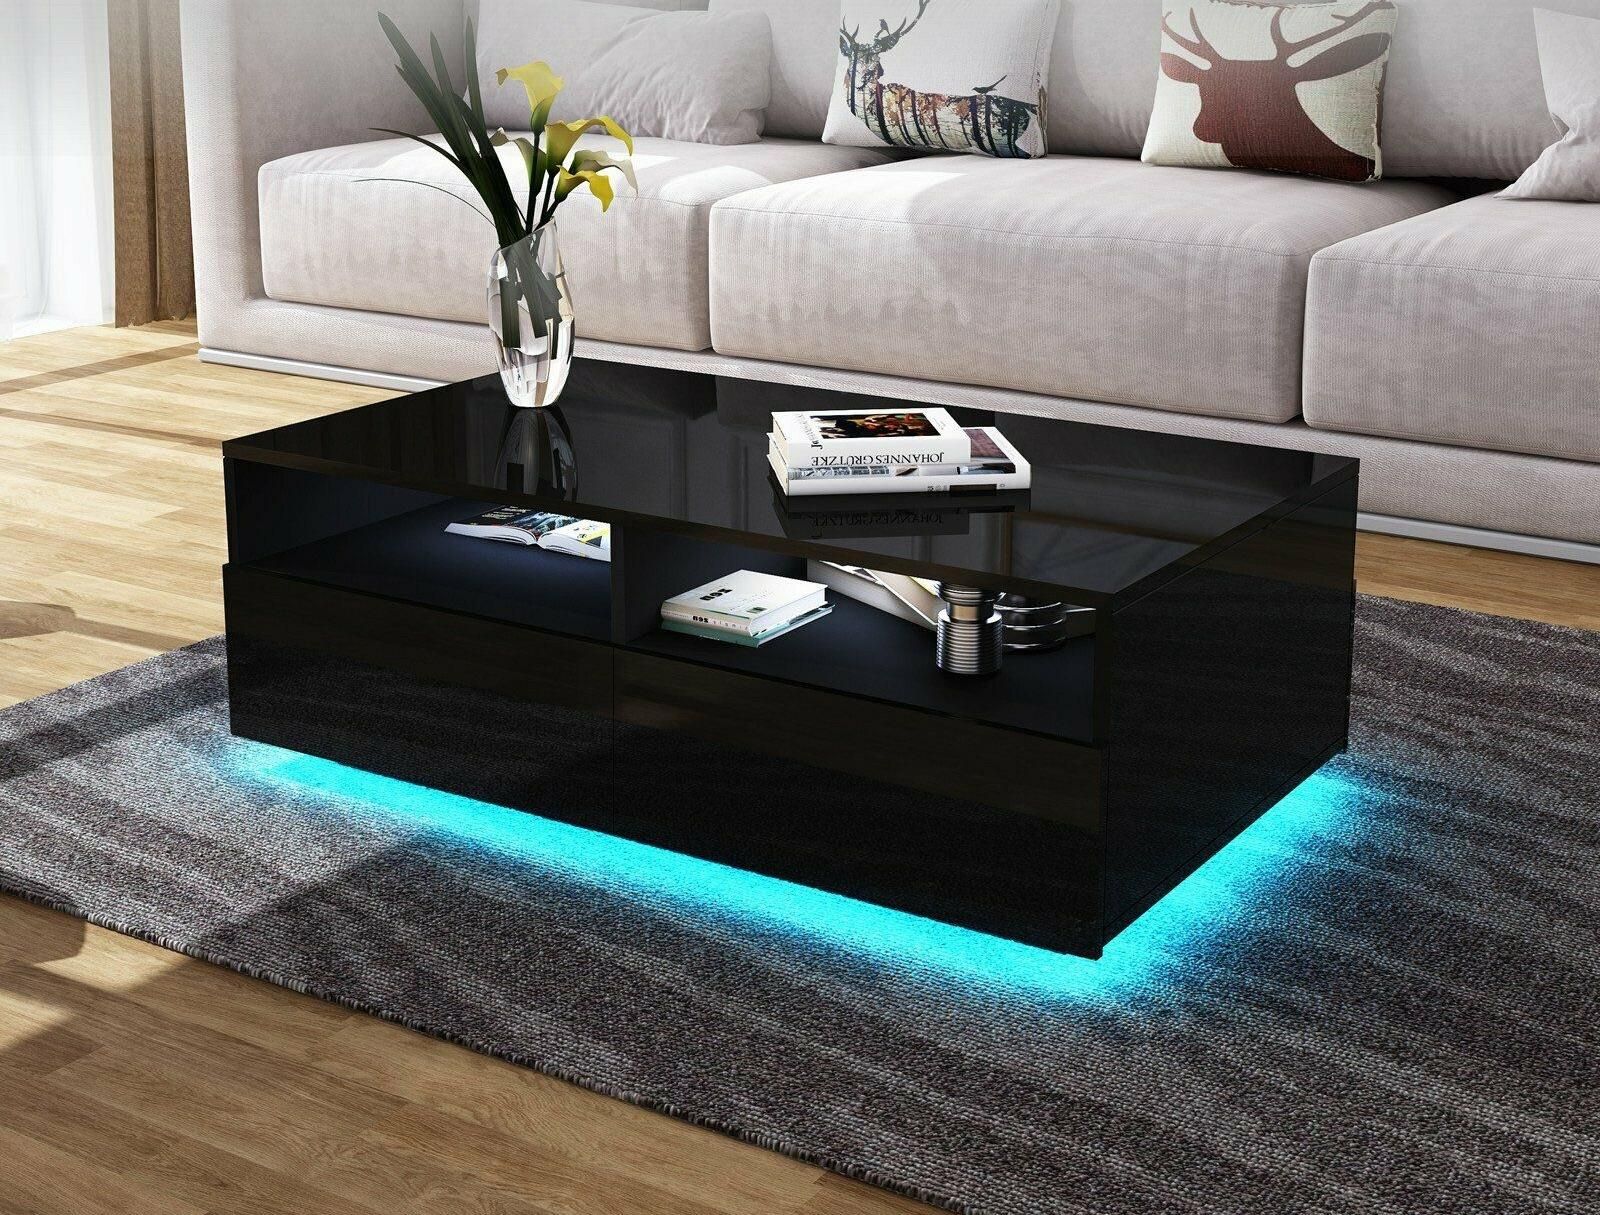 Living Room Rectangle Coffee Table 4 Drawers Rgb 16 Color Led Lights | Ebay Intended For Led Coffee Tables With 4 Drawers (Gallery 6 of 20)